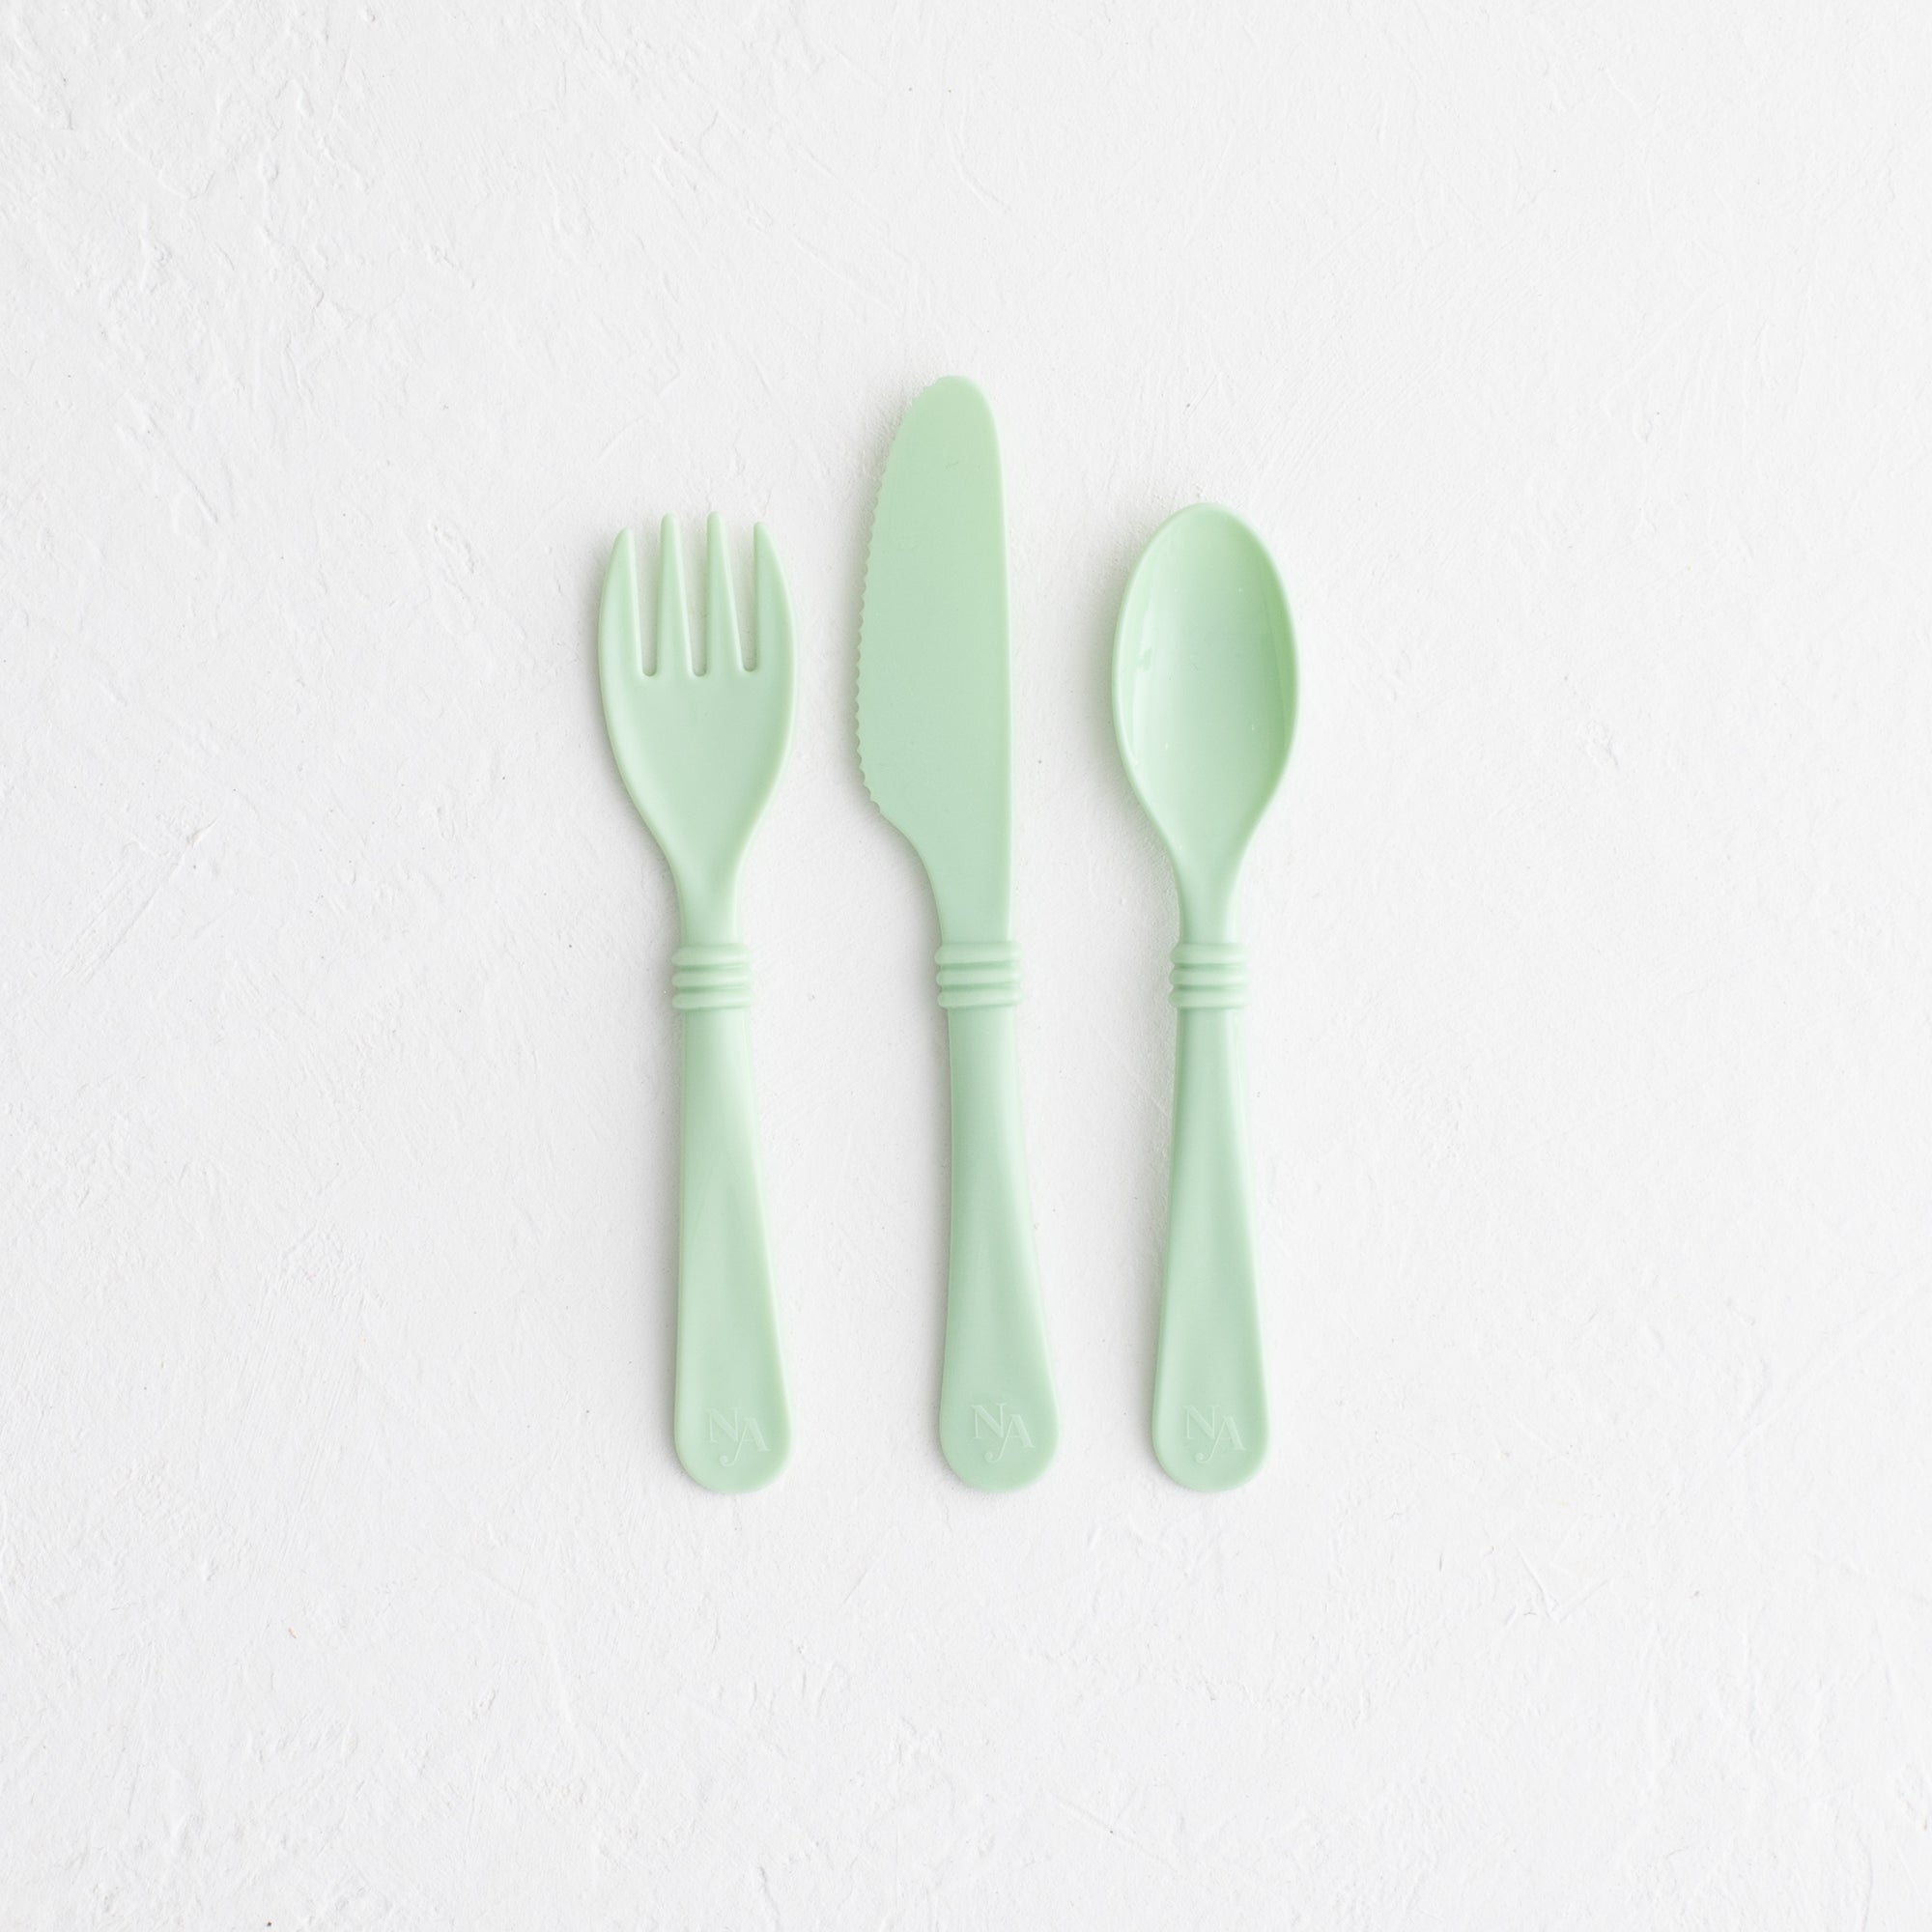 Recycled plastic cutlery set - eco-friendly utensils for sustainable dining - green set.